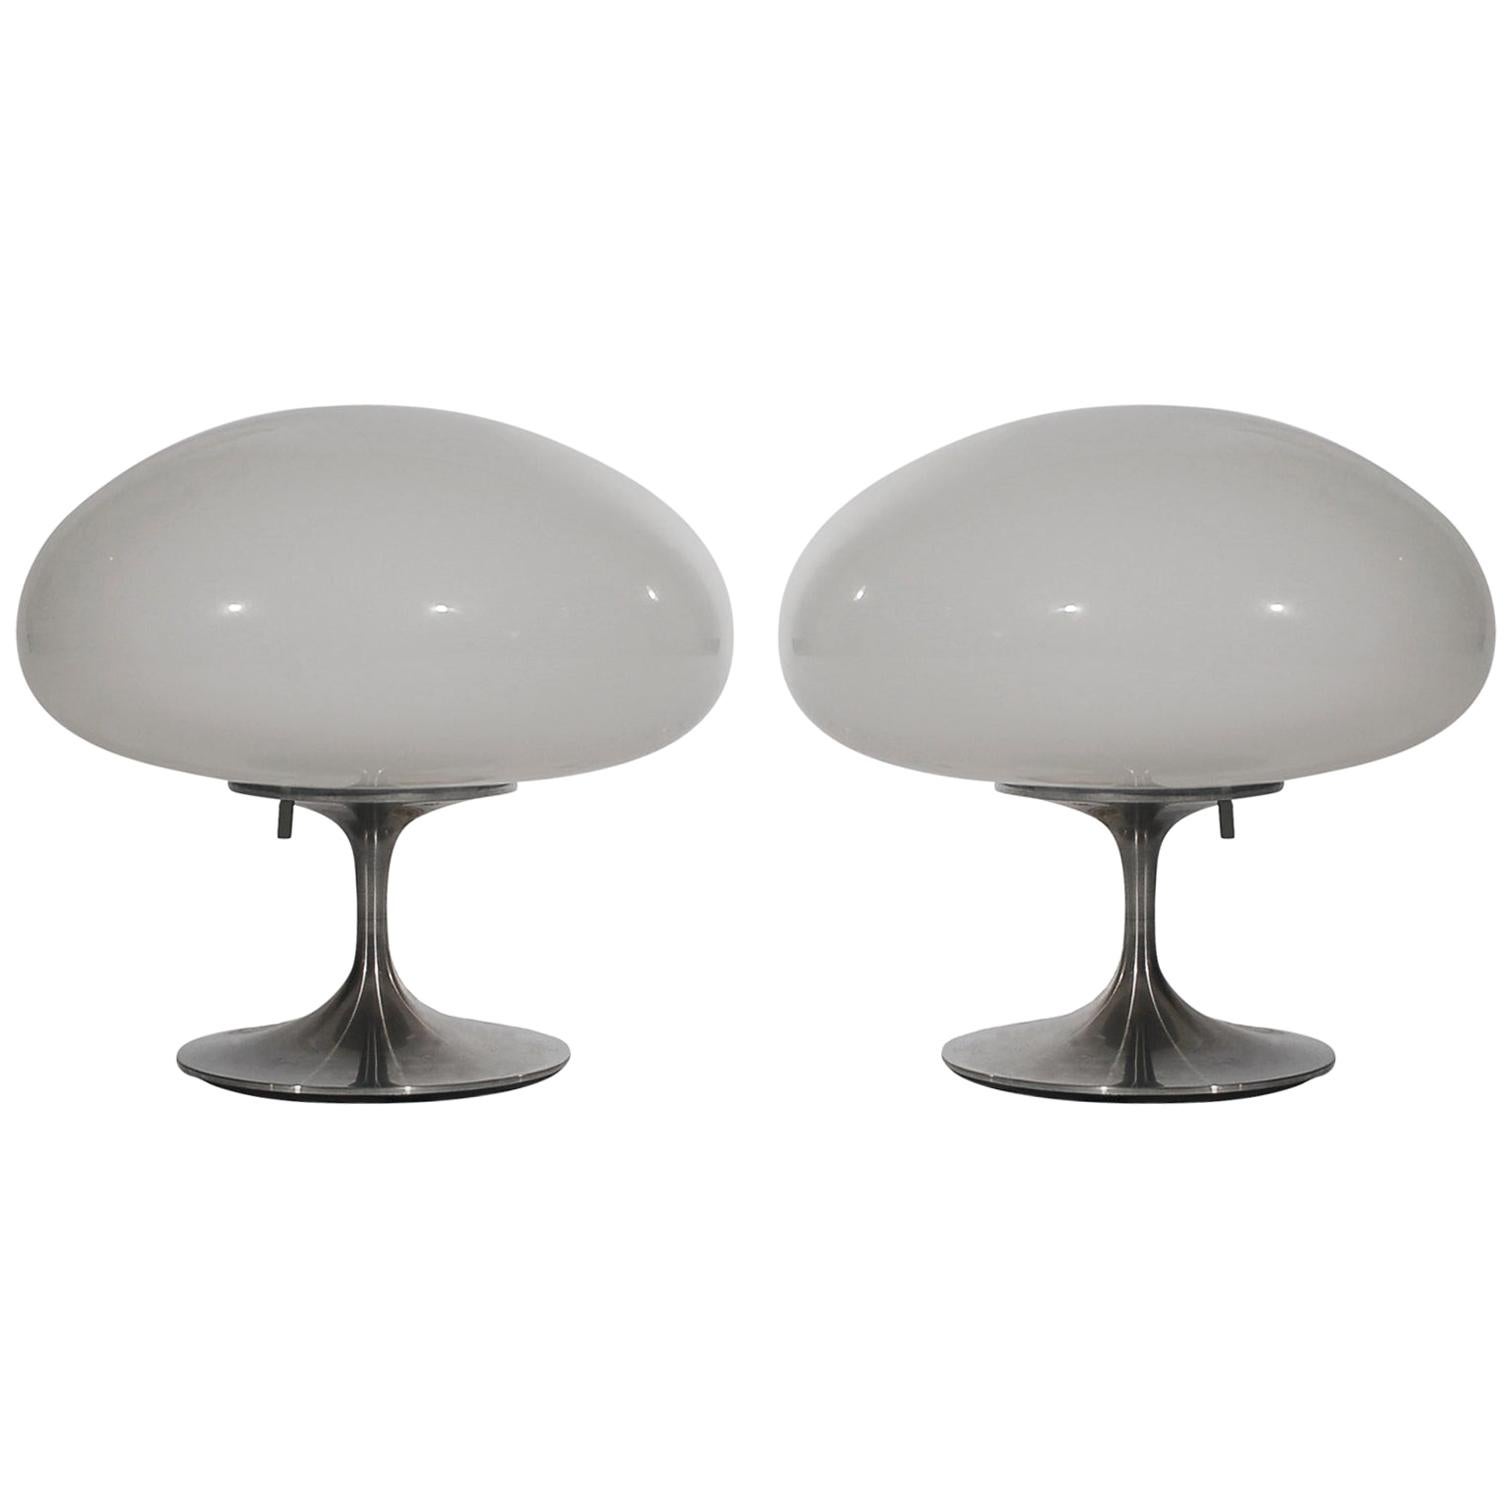 Matching Pair of Bill Curry Mid-Century Modern Mushroom Table Lamps for Stemlite